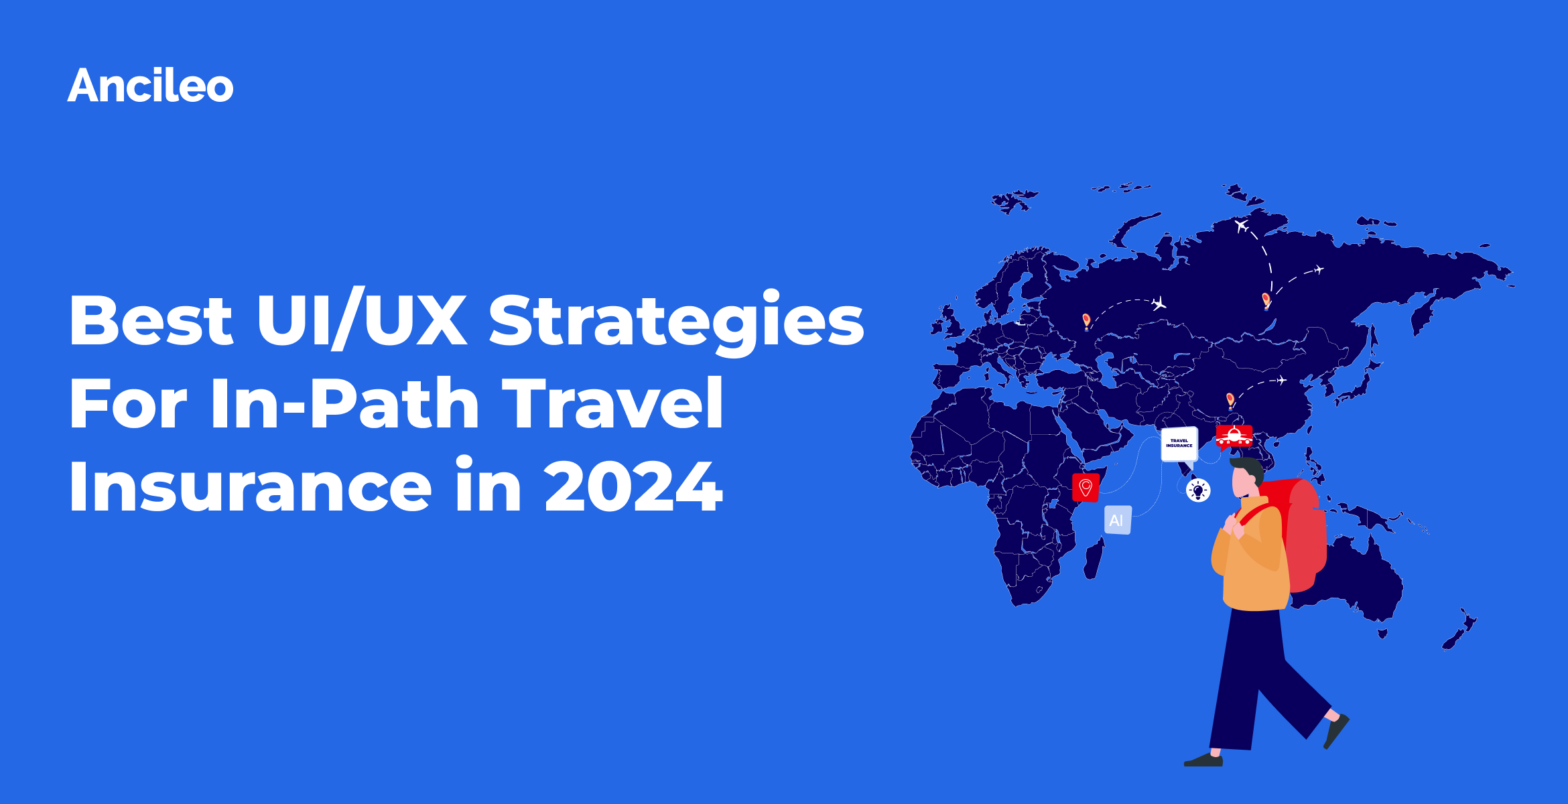 Best UI/UX Strategies For In-Path Travel Insurance in 2024